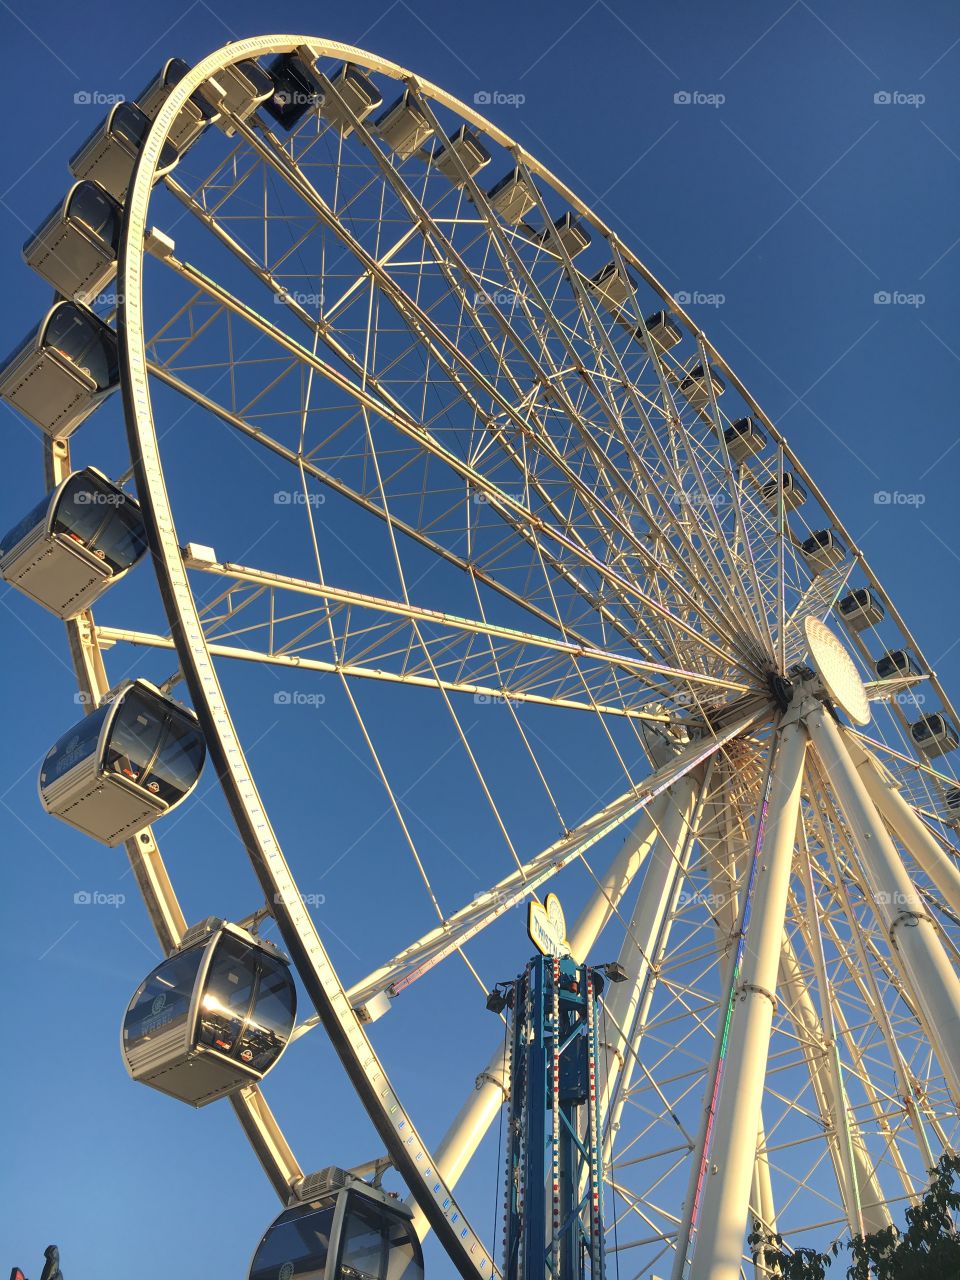 A really nice Ferris wheel in Tennessee. The boxes were air conditioned!